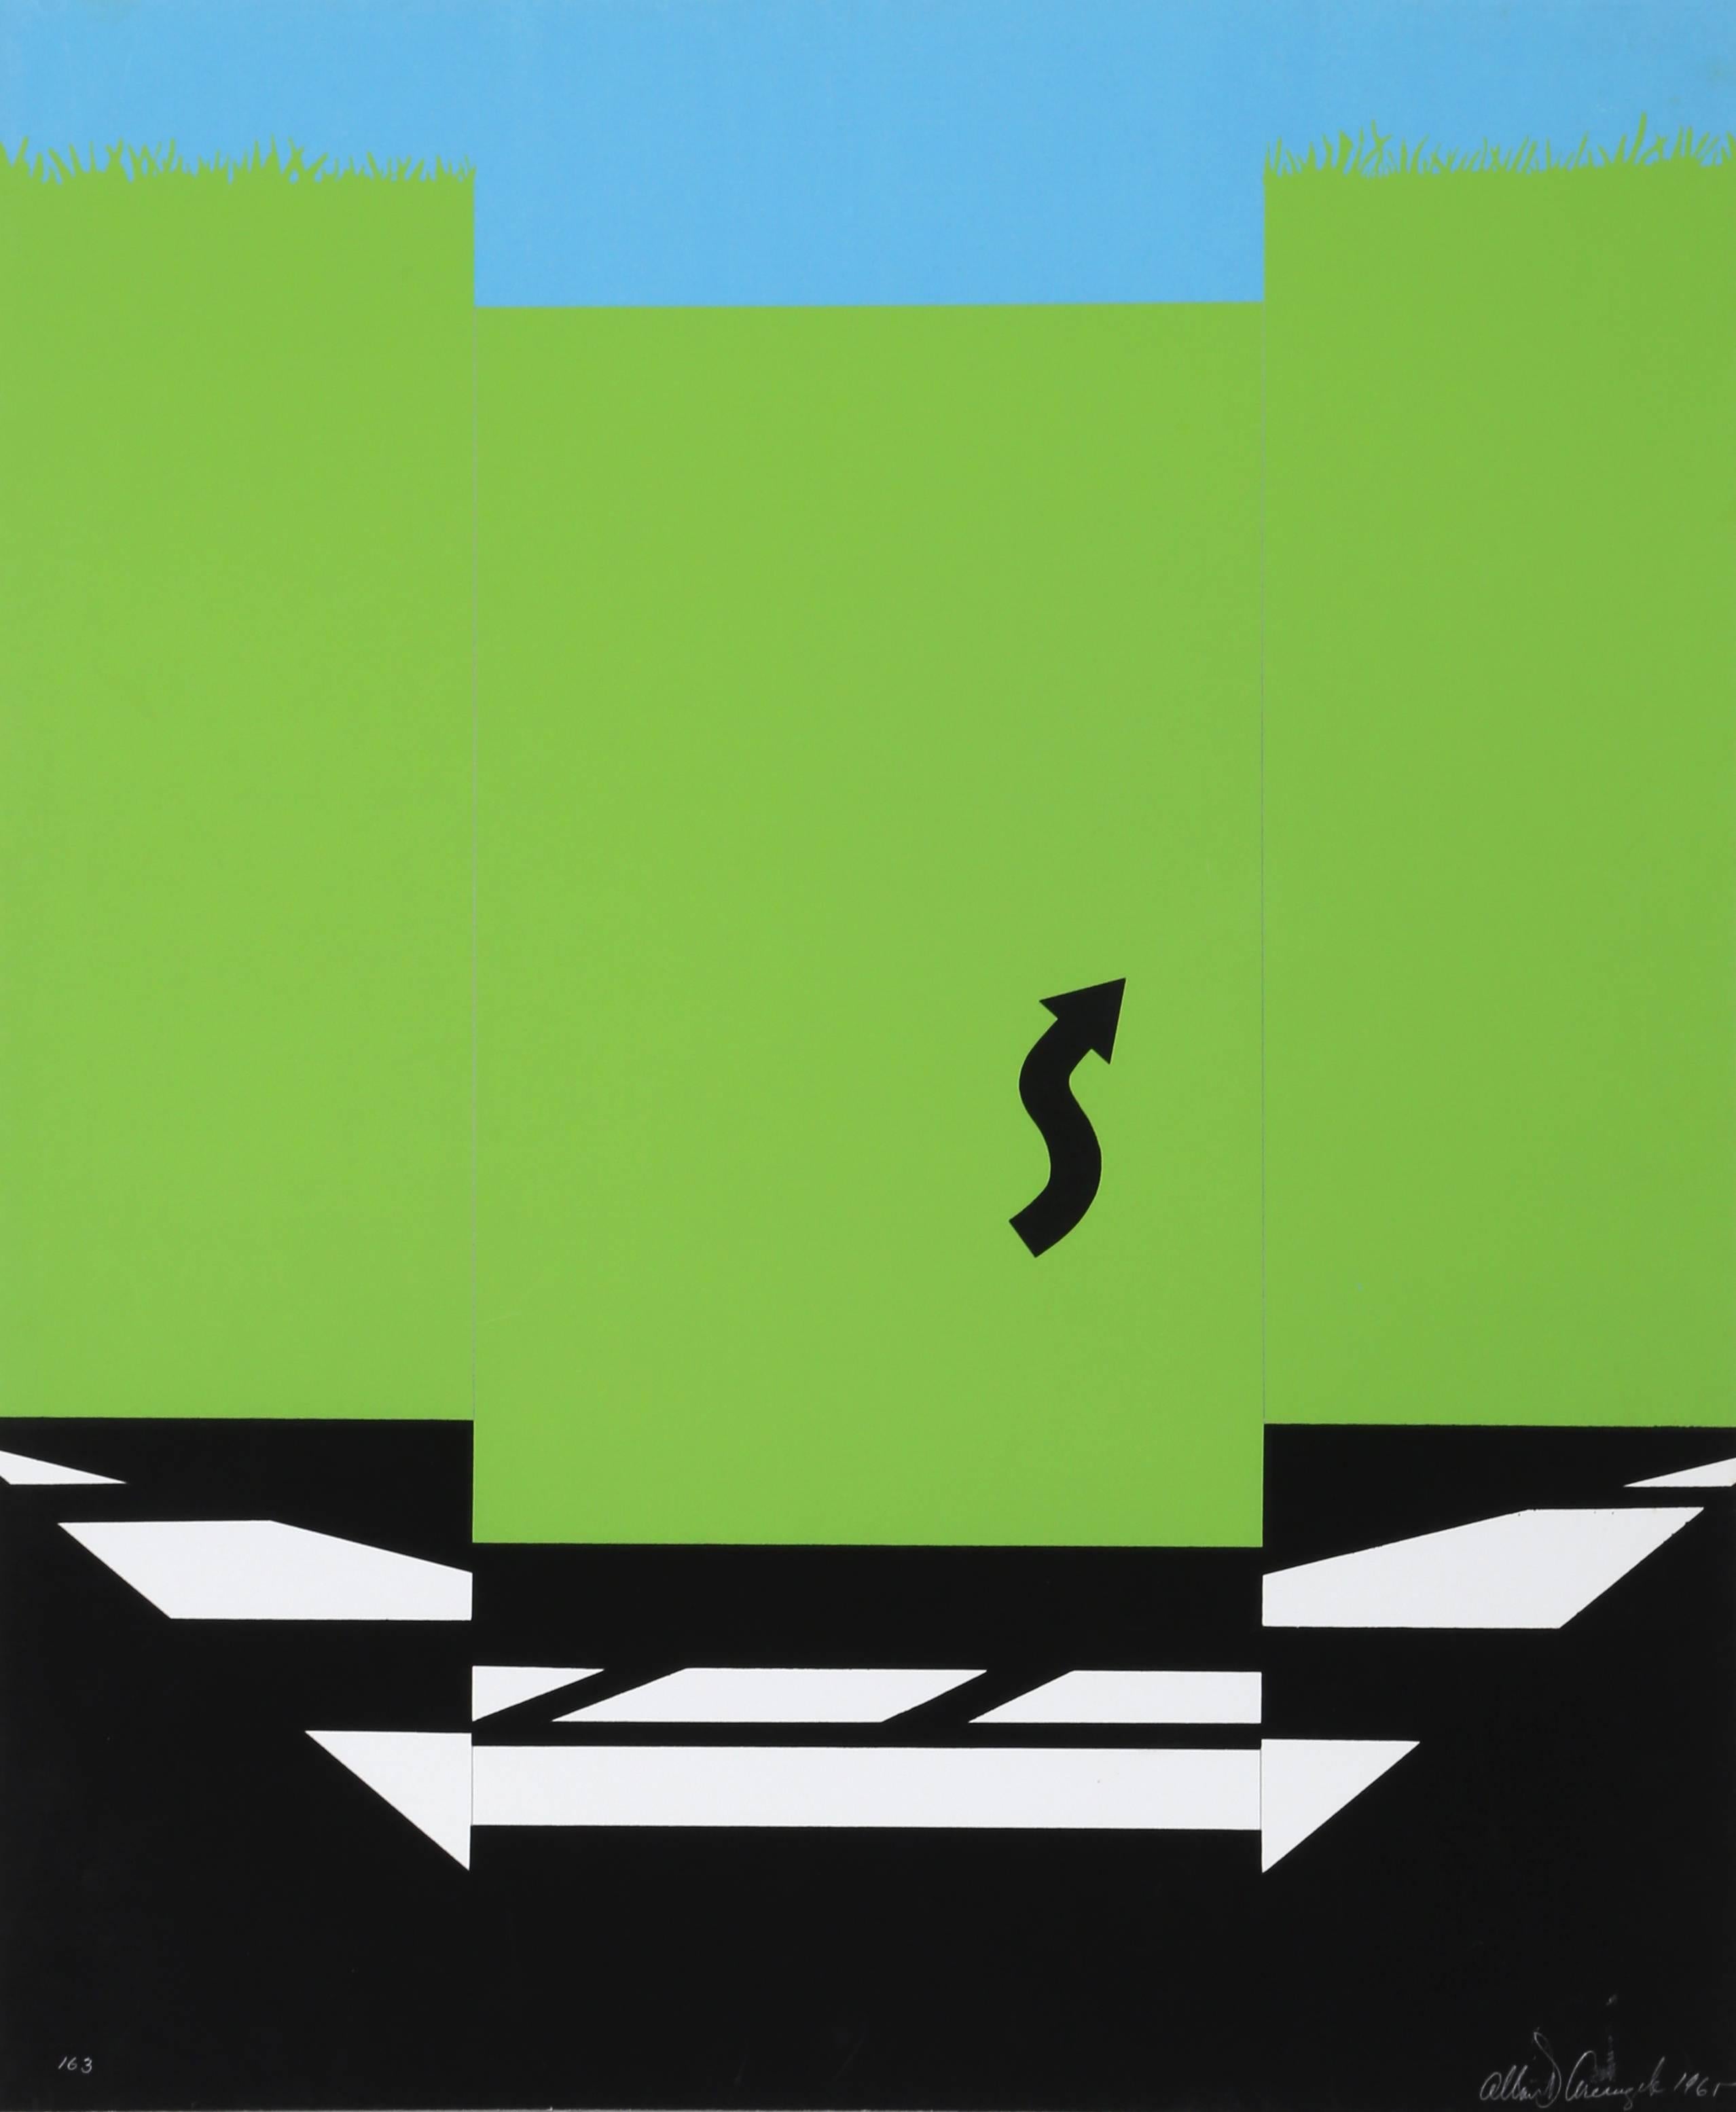 Artist: Allan D'Arcangelo, American (1930 - 1998)
Title:	Landscape I from 11 Pop Artists
Year: 1965
Medium: Silkscreen, signed and numbered in pencil
Edition:	200, XXII/L
Size: 24  x 20 in. (60.96  x 50.8 cm)

Printer: Knickerbocker Machine and